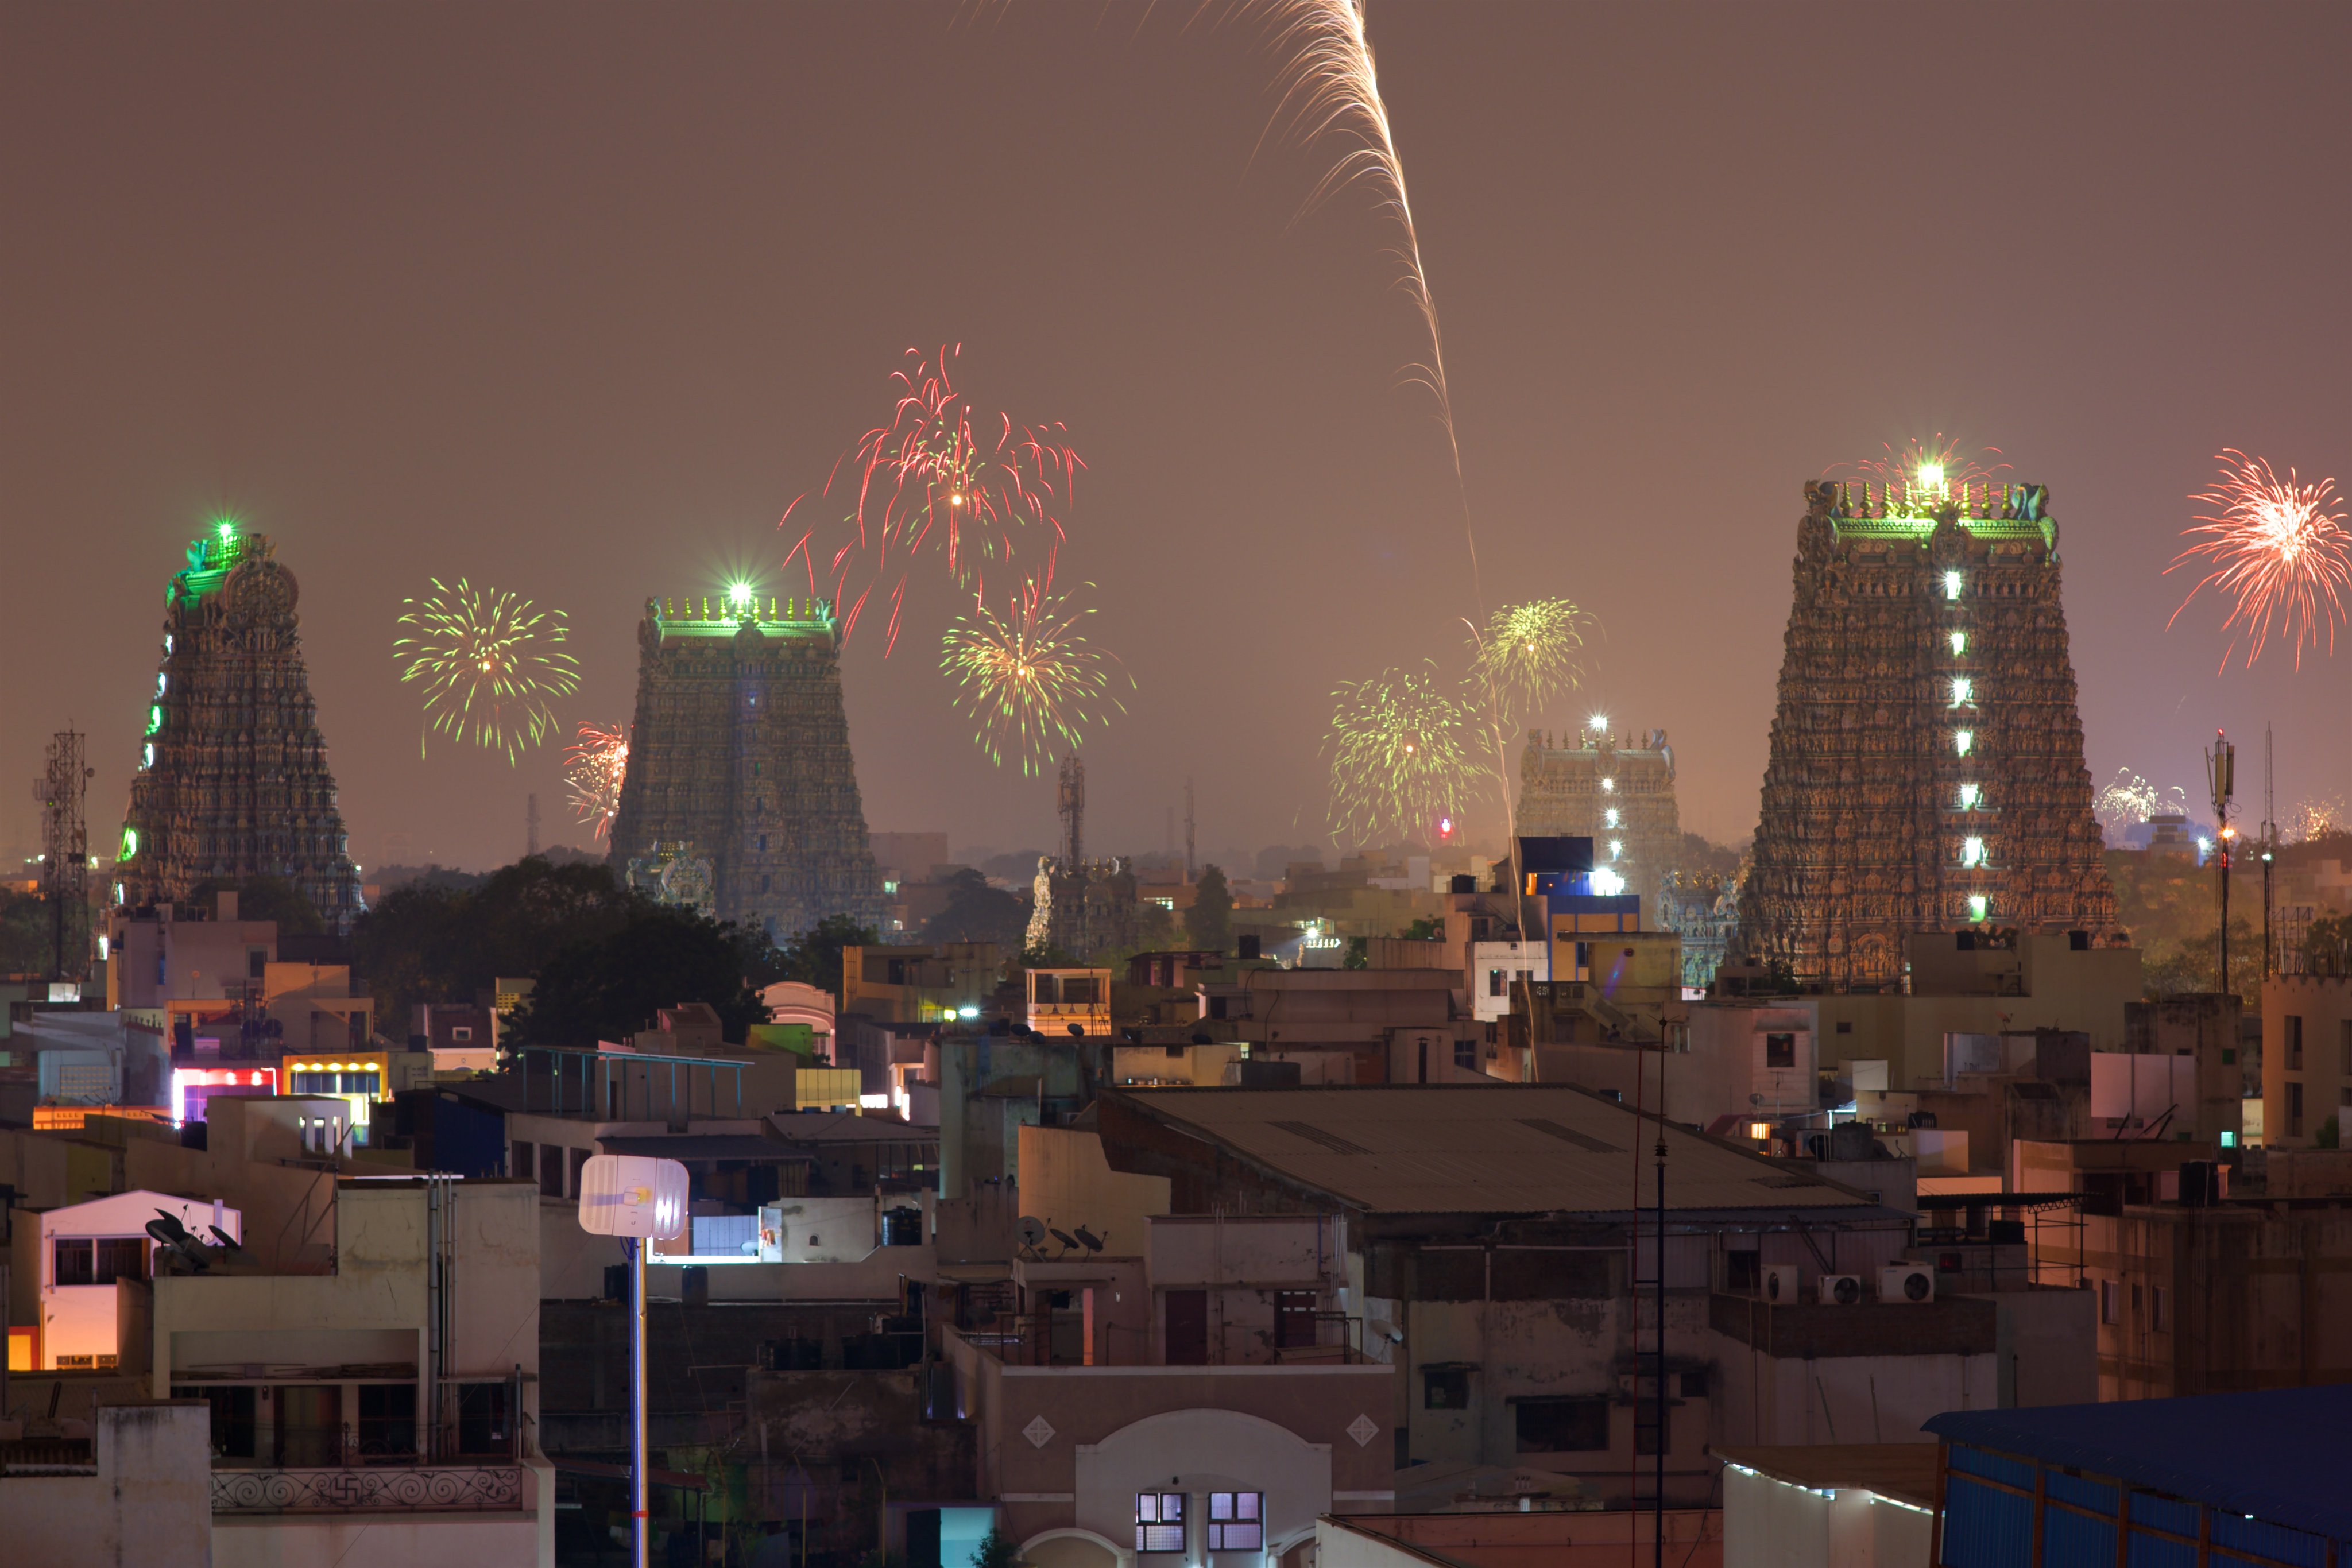 backpacksbridges on Twitter: "#Diwali in #Madurai #India with #fireworks  throughout the city. Quite special to witness it with a view of  #SriMeenakshi. #HappyDiwali ! https://t.co/A4CIaHO2qz" / Twitter